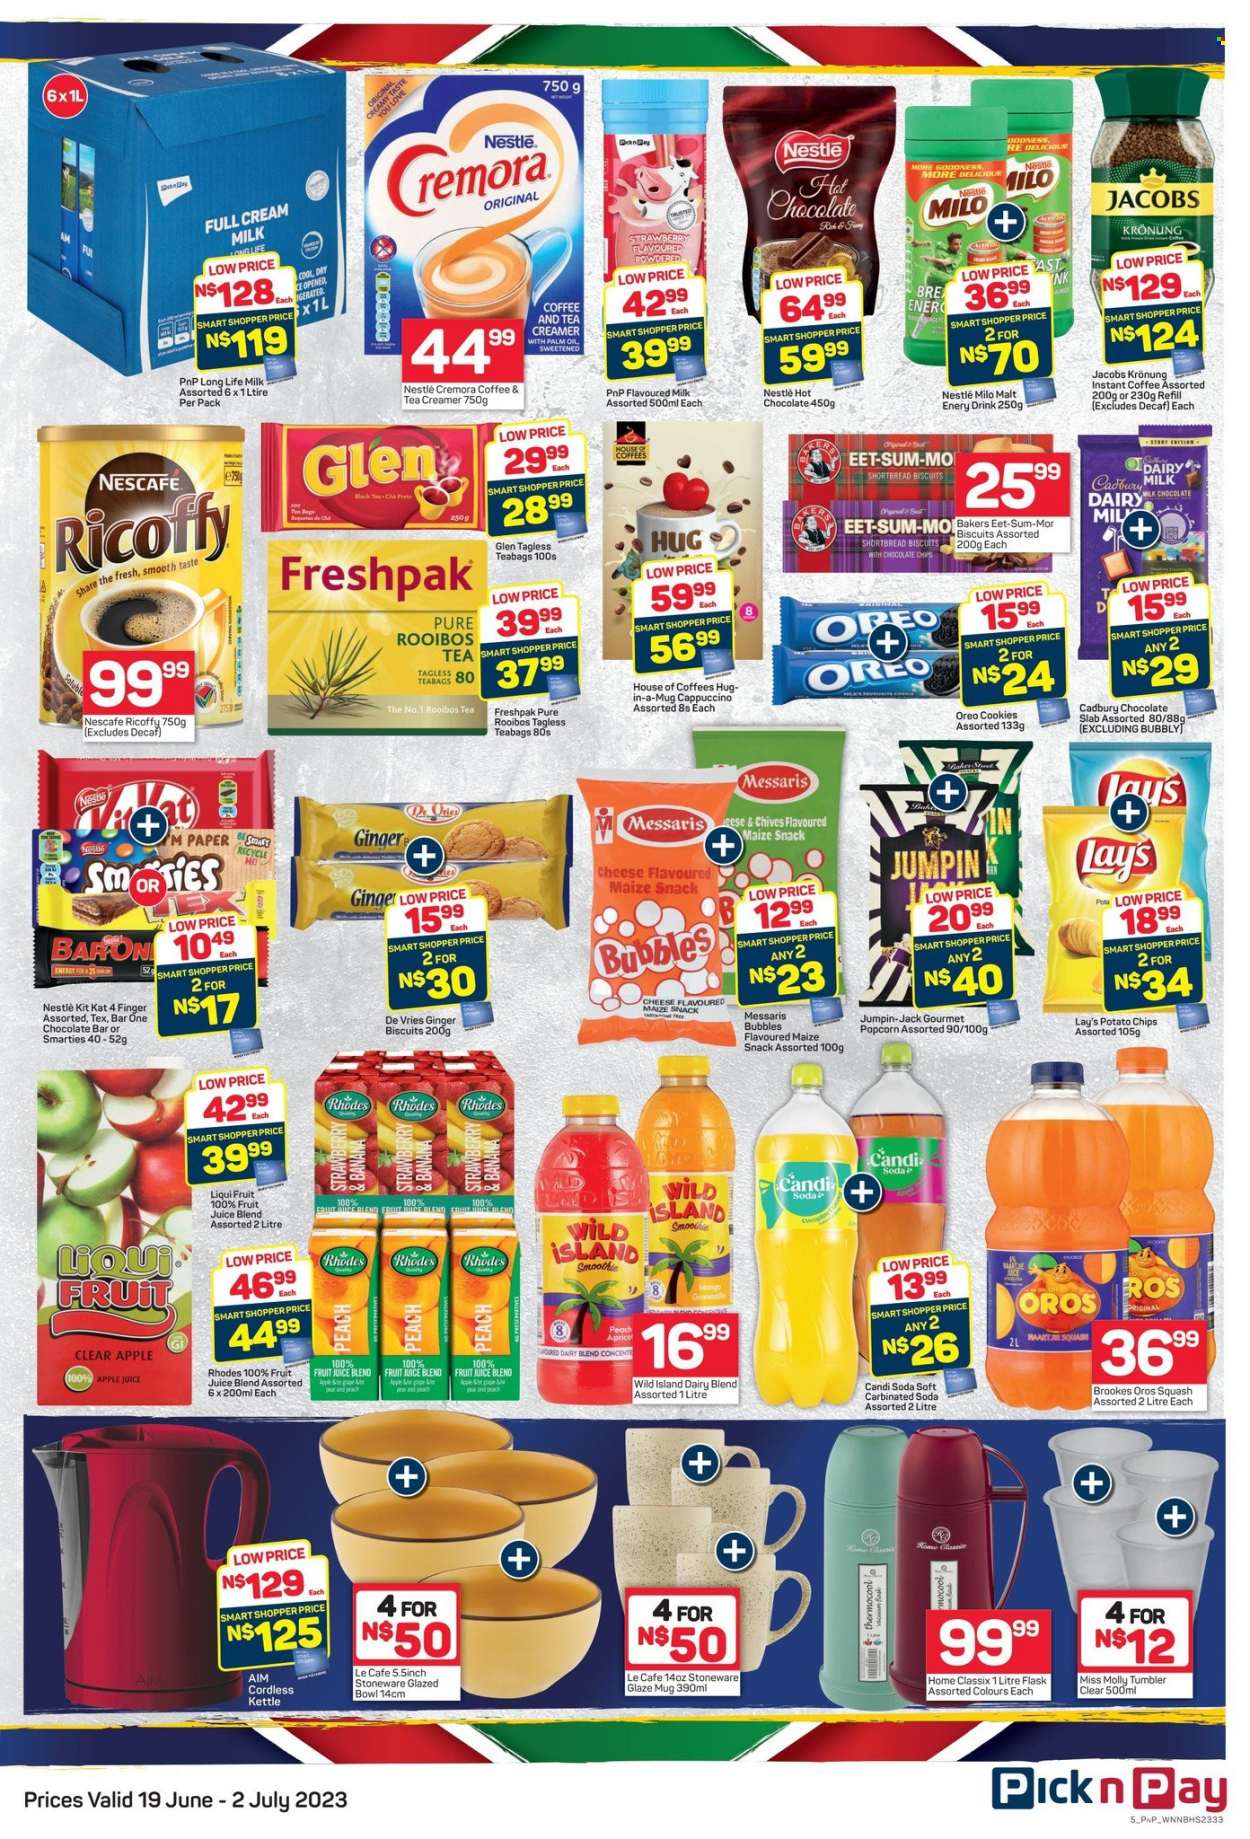 Pick n Pay catalogue  - 19/06/2023 - 02/07/2023 - Sales products - tart, ginger, snack, chives, mango, Oreo, flavoured milk, long life milk, Milo, dairy blend, creamer, coffee and tea creamer, cookies, Nestlé, KitKat, Smarties, biscuit, Cadbury, chocolate bar, potato chips, Lay’s, maize snack, popcorn, Cremora, malt, oil, apple juice, fruit juice, juice, Oros, smoothie, soda, hot chocolate, tea bags, rooibos tea, cappuccino, coffee, instant coffee, Jacobs, Ricoffy, Nescafé, Jacobs Krönung, Bakers. Page 5.